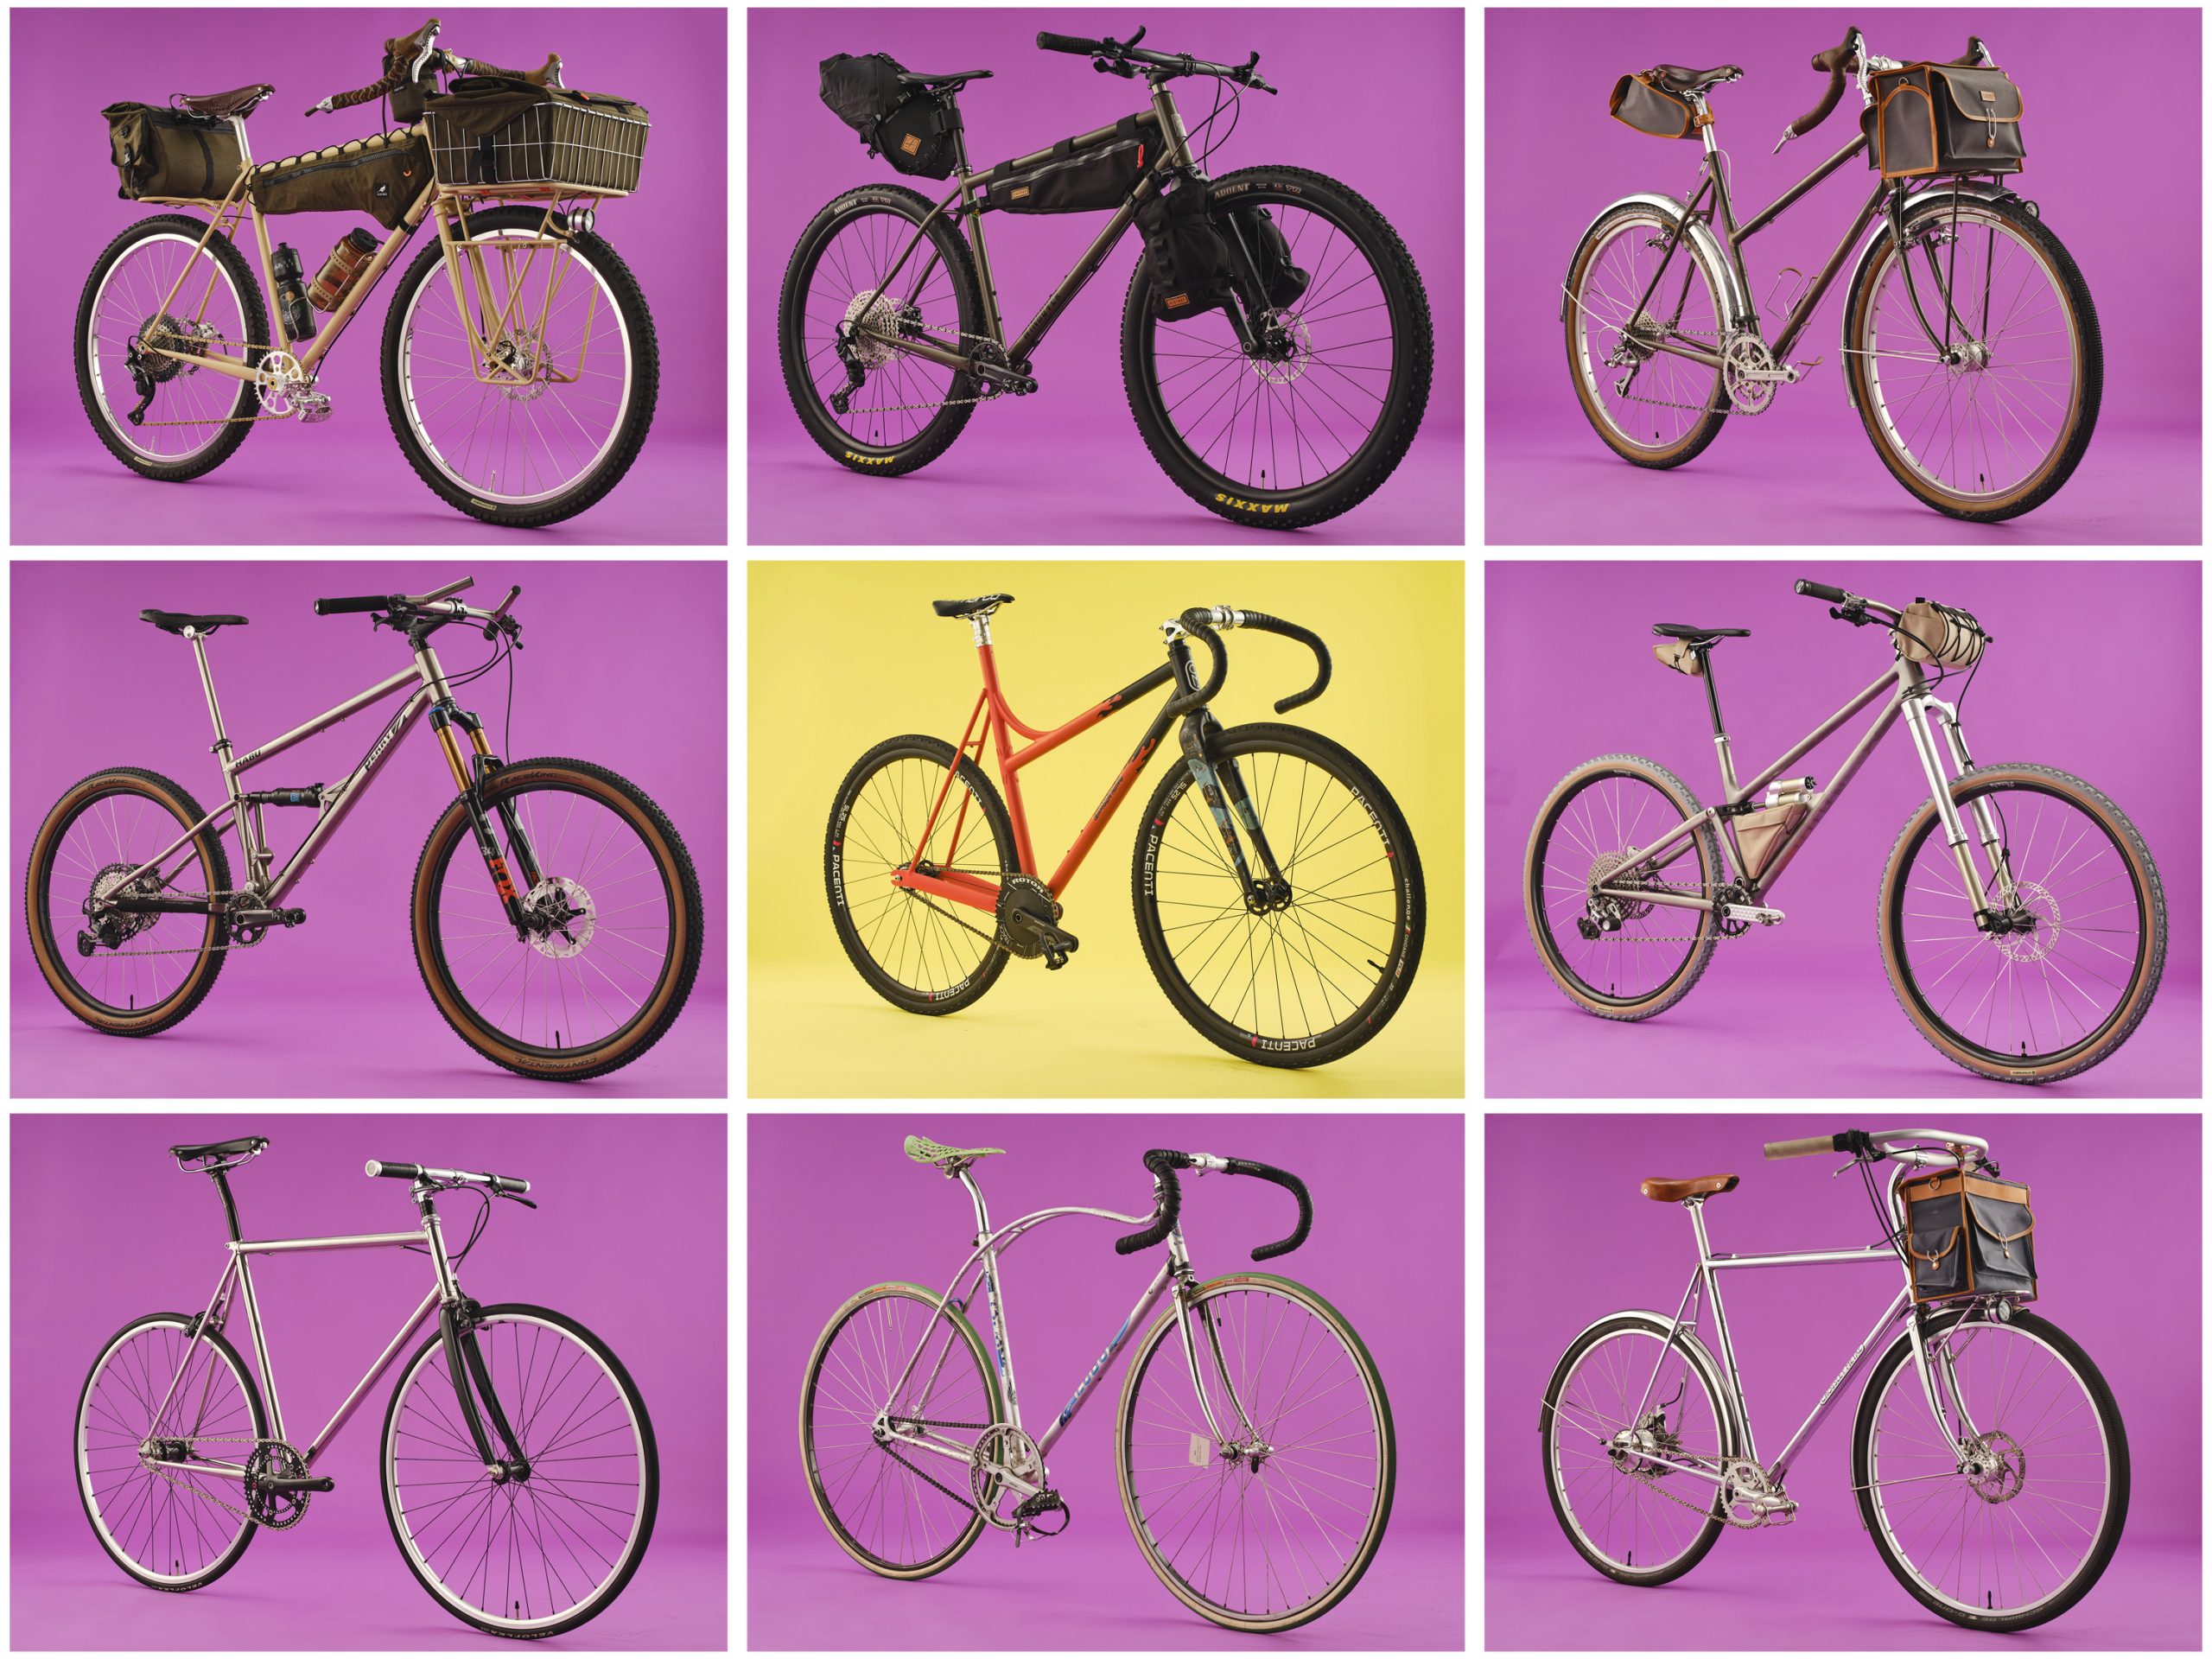 Collage of studio photographs of handmade bikes on display at the Bespoked bike show in 2022